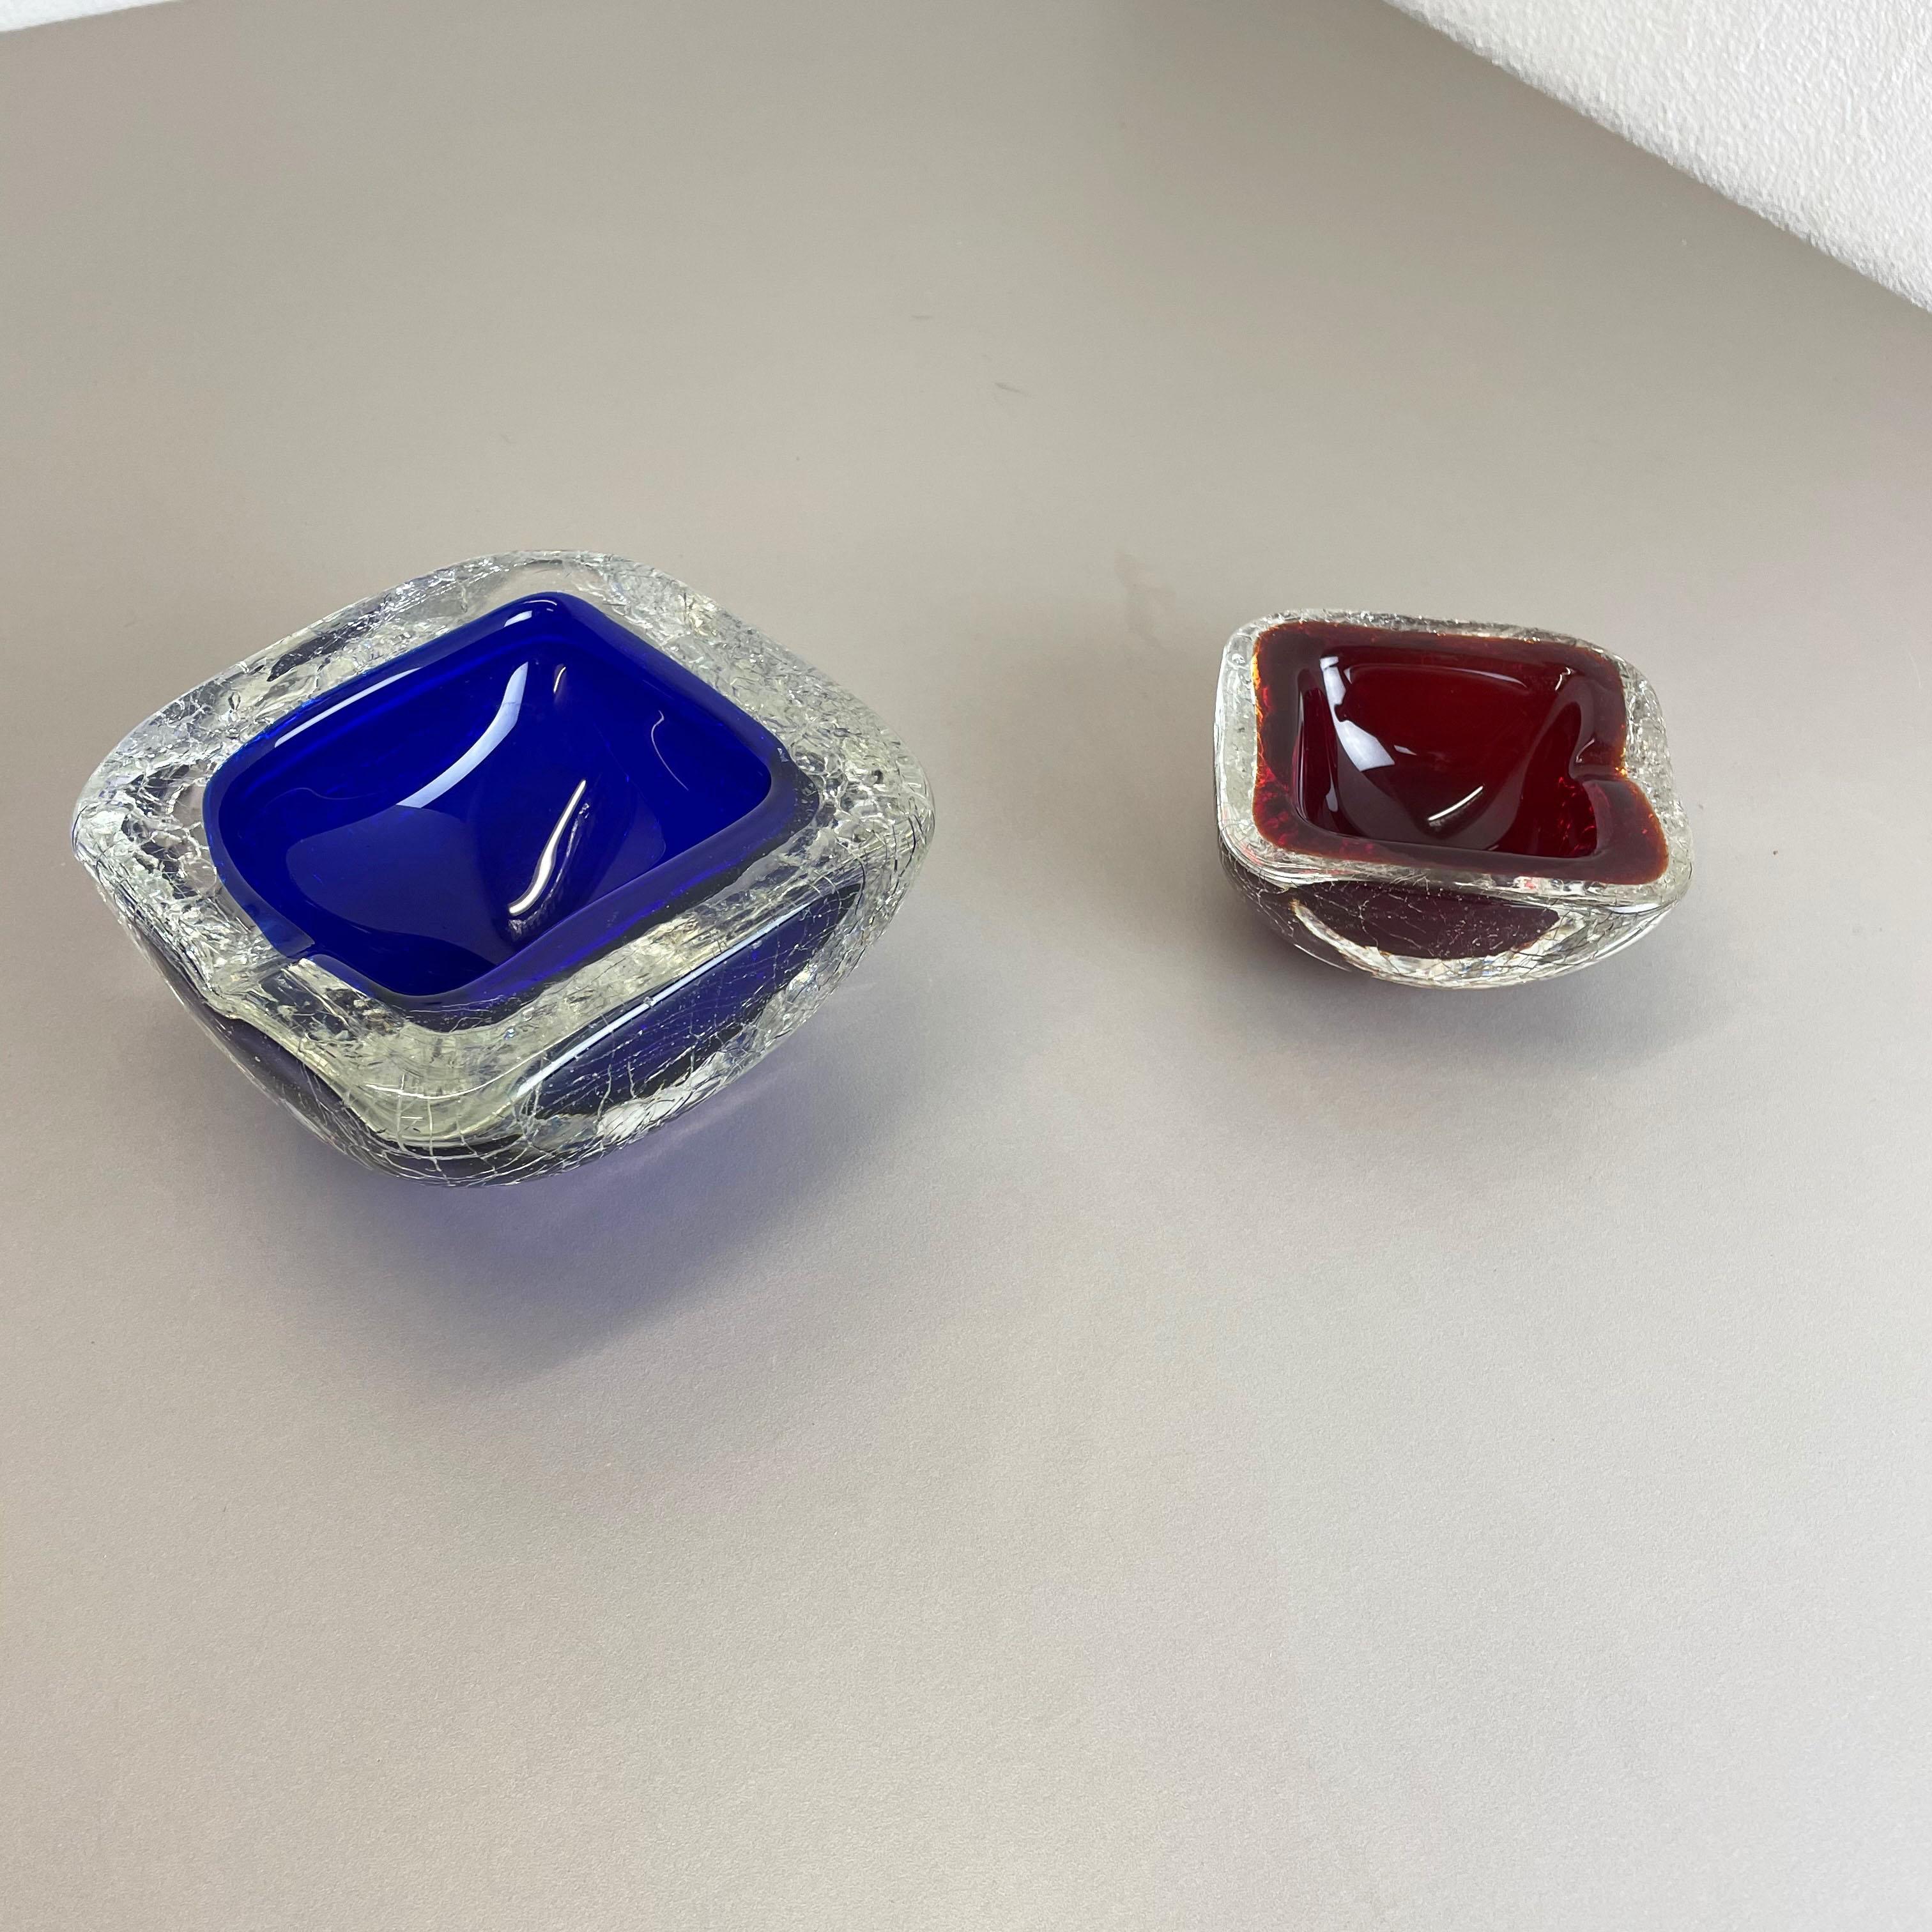 Mid-Century Modern Set of 2 Murano Glass Crack Structure Bowl Shells Ashtray Element, Italy, 1970s For Sale